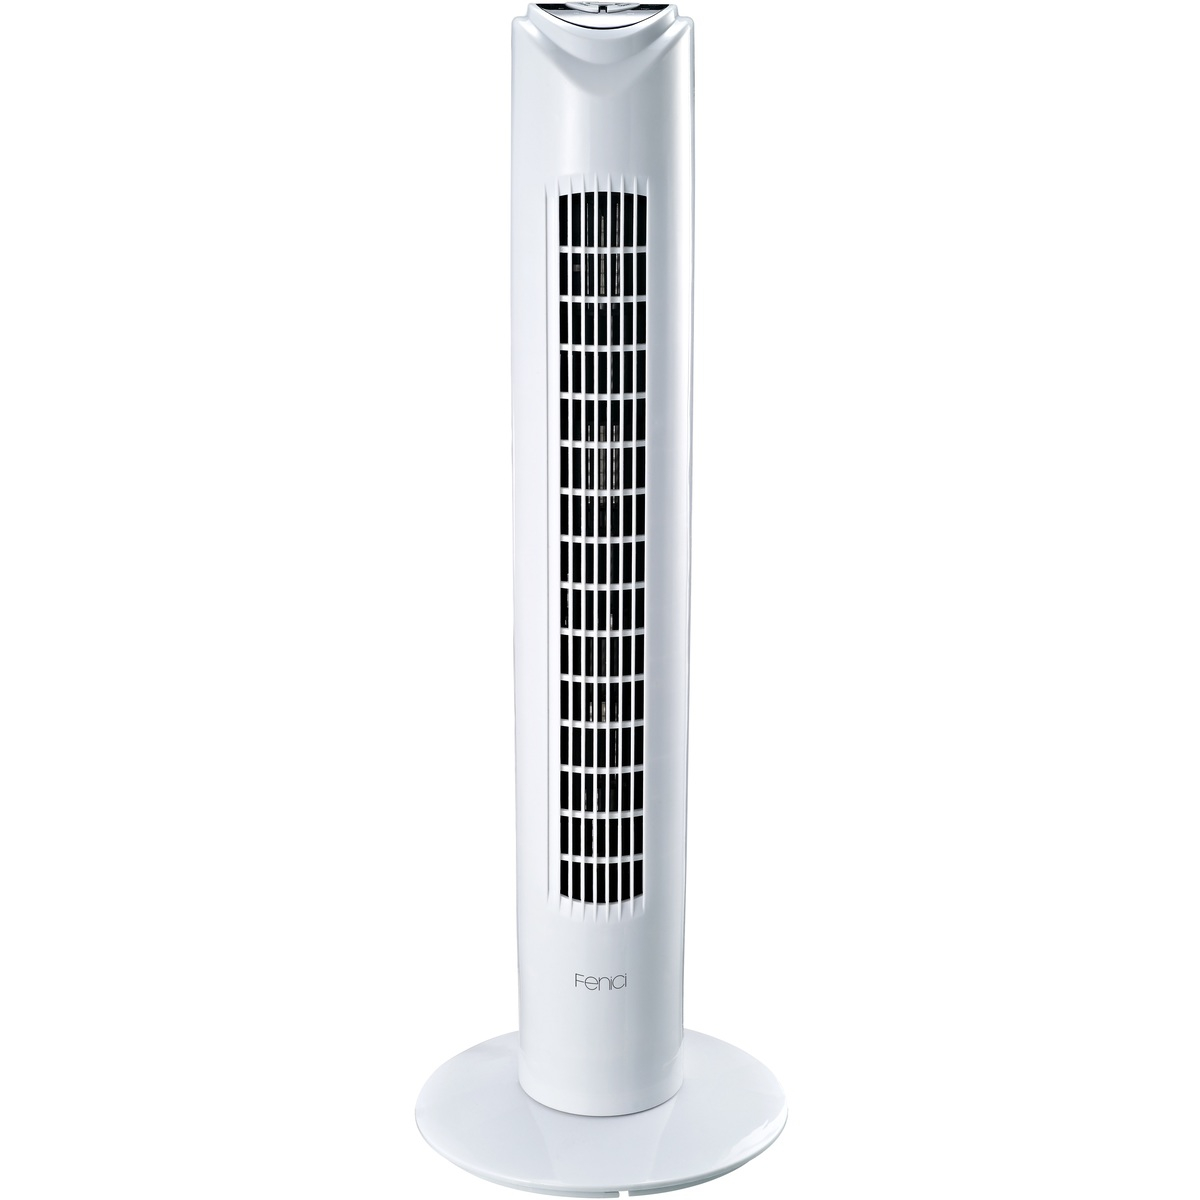 Fenici 80cm Tower Fan With Remote Control White Fyf29rb throughout proportions 1200 X 1200